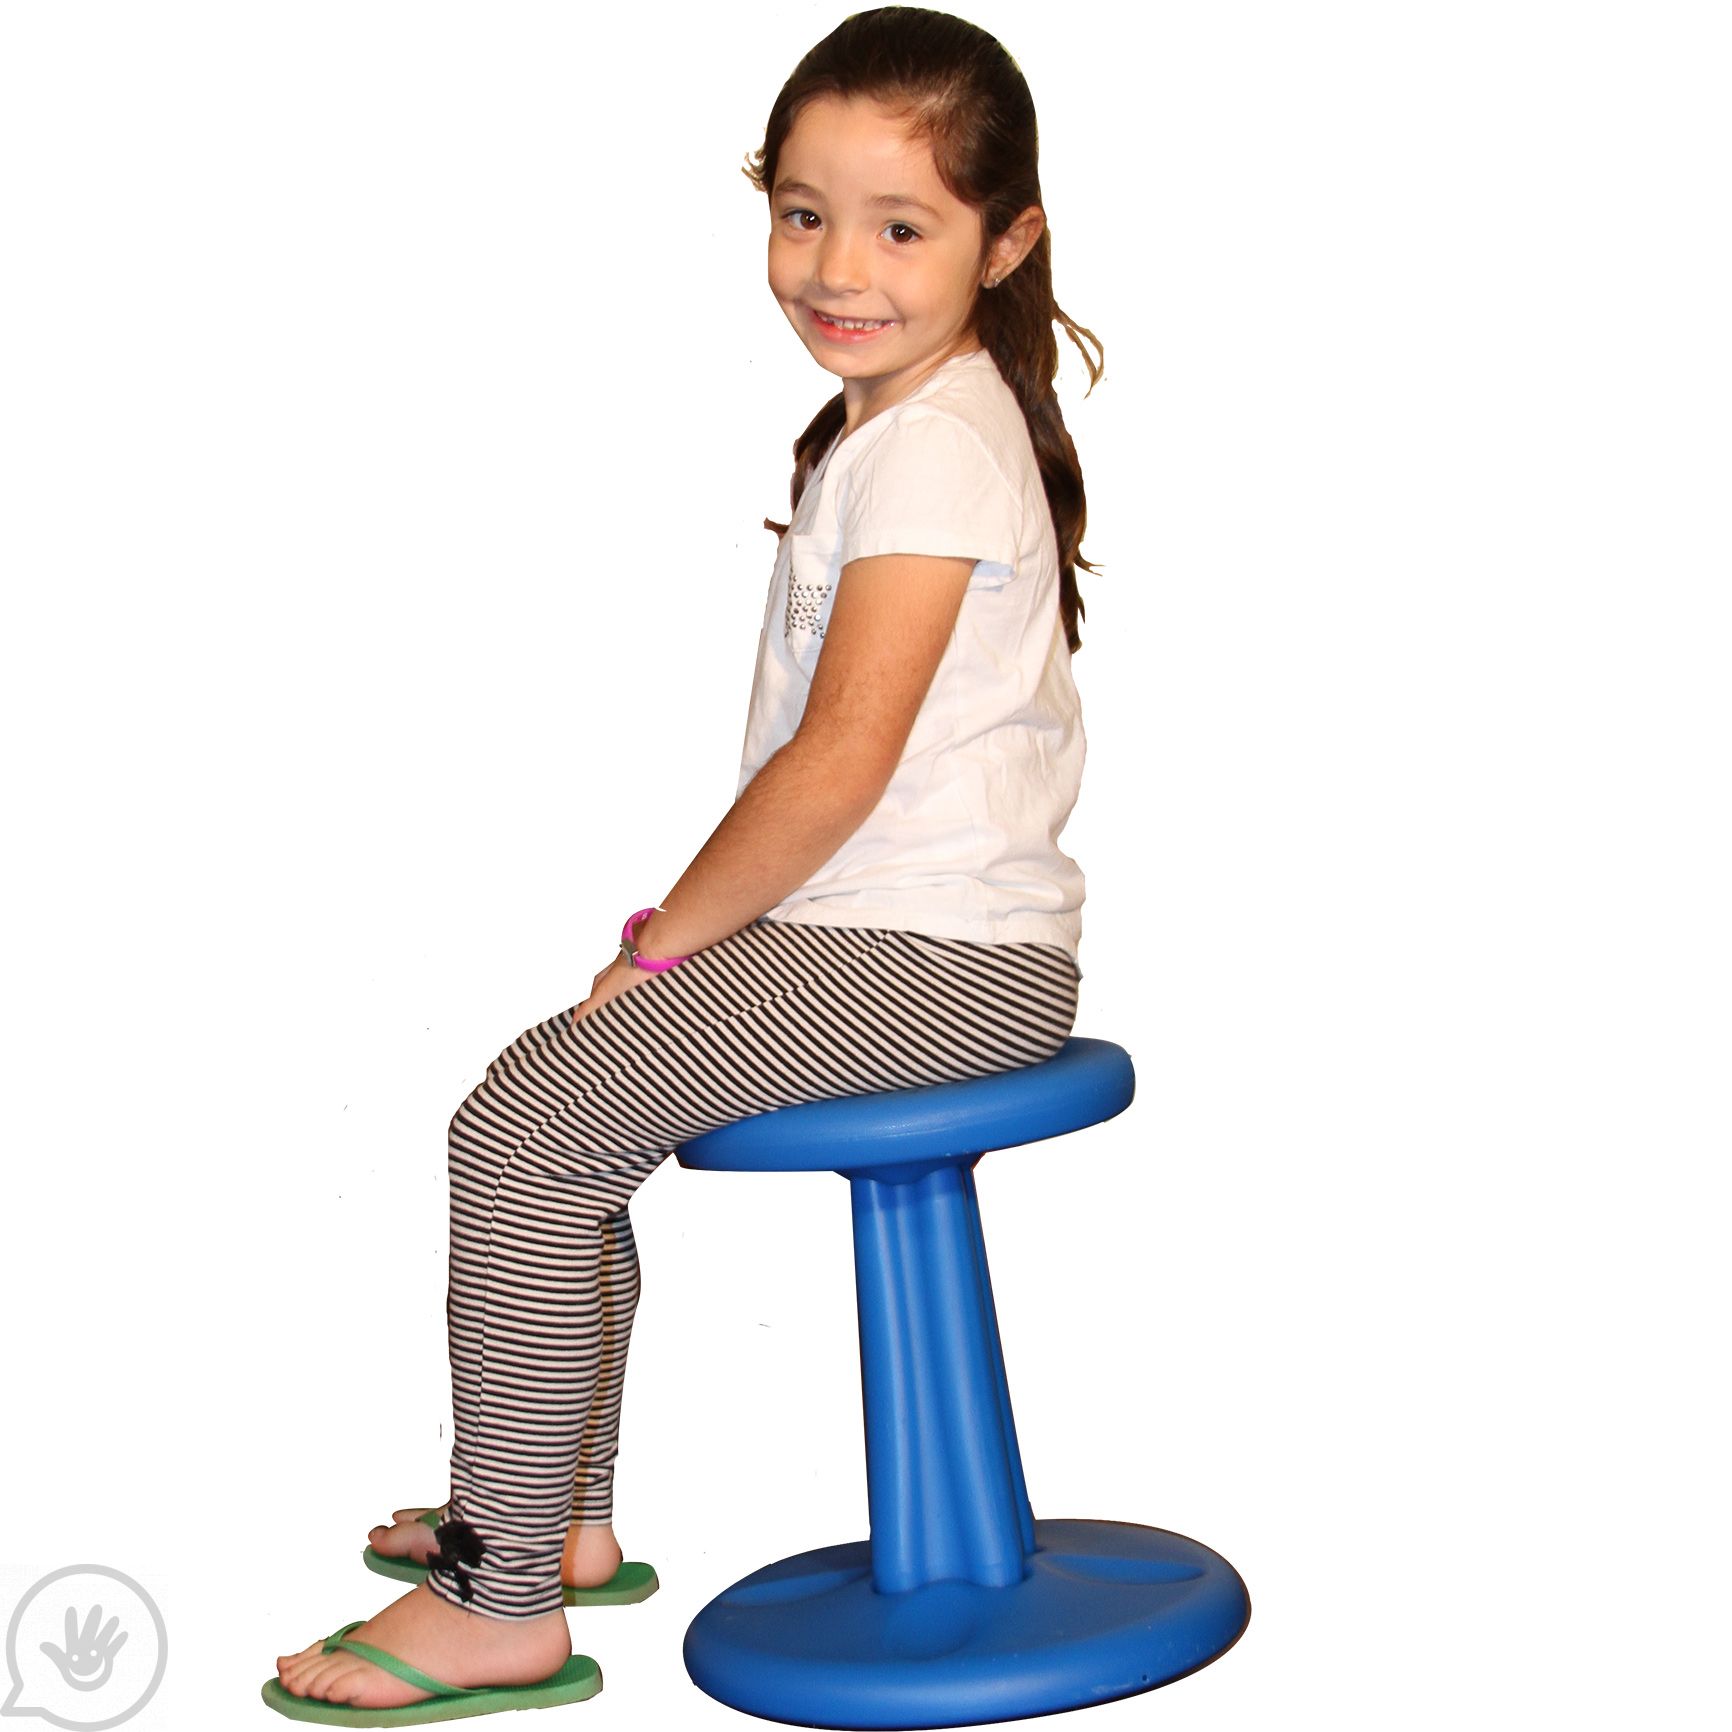 Ten Tips for using Wobble Cushions in the Classroom and at Home